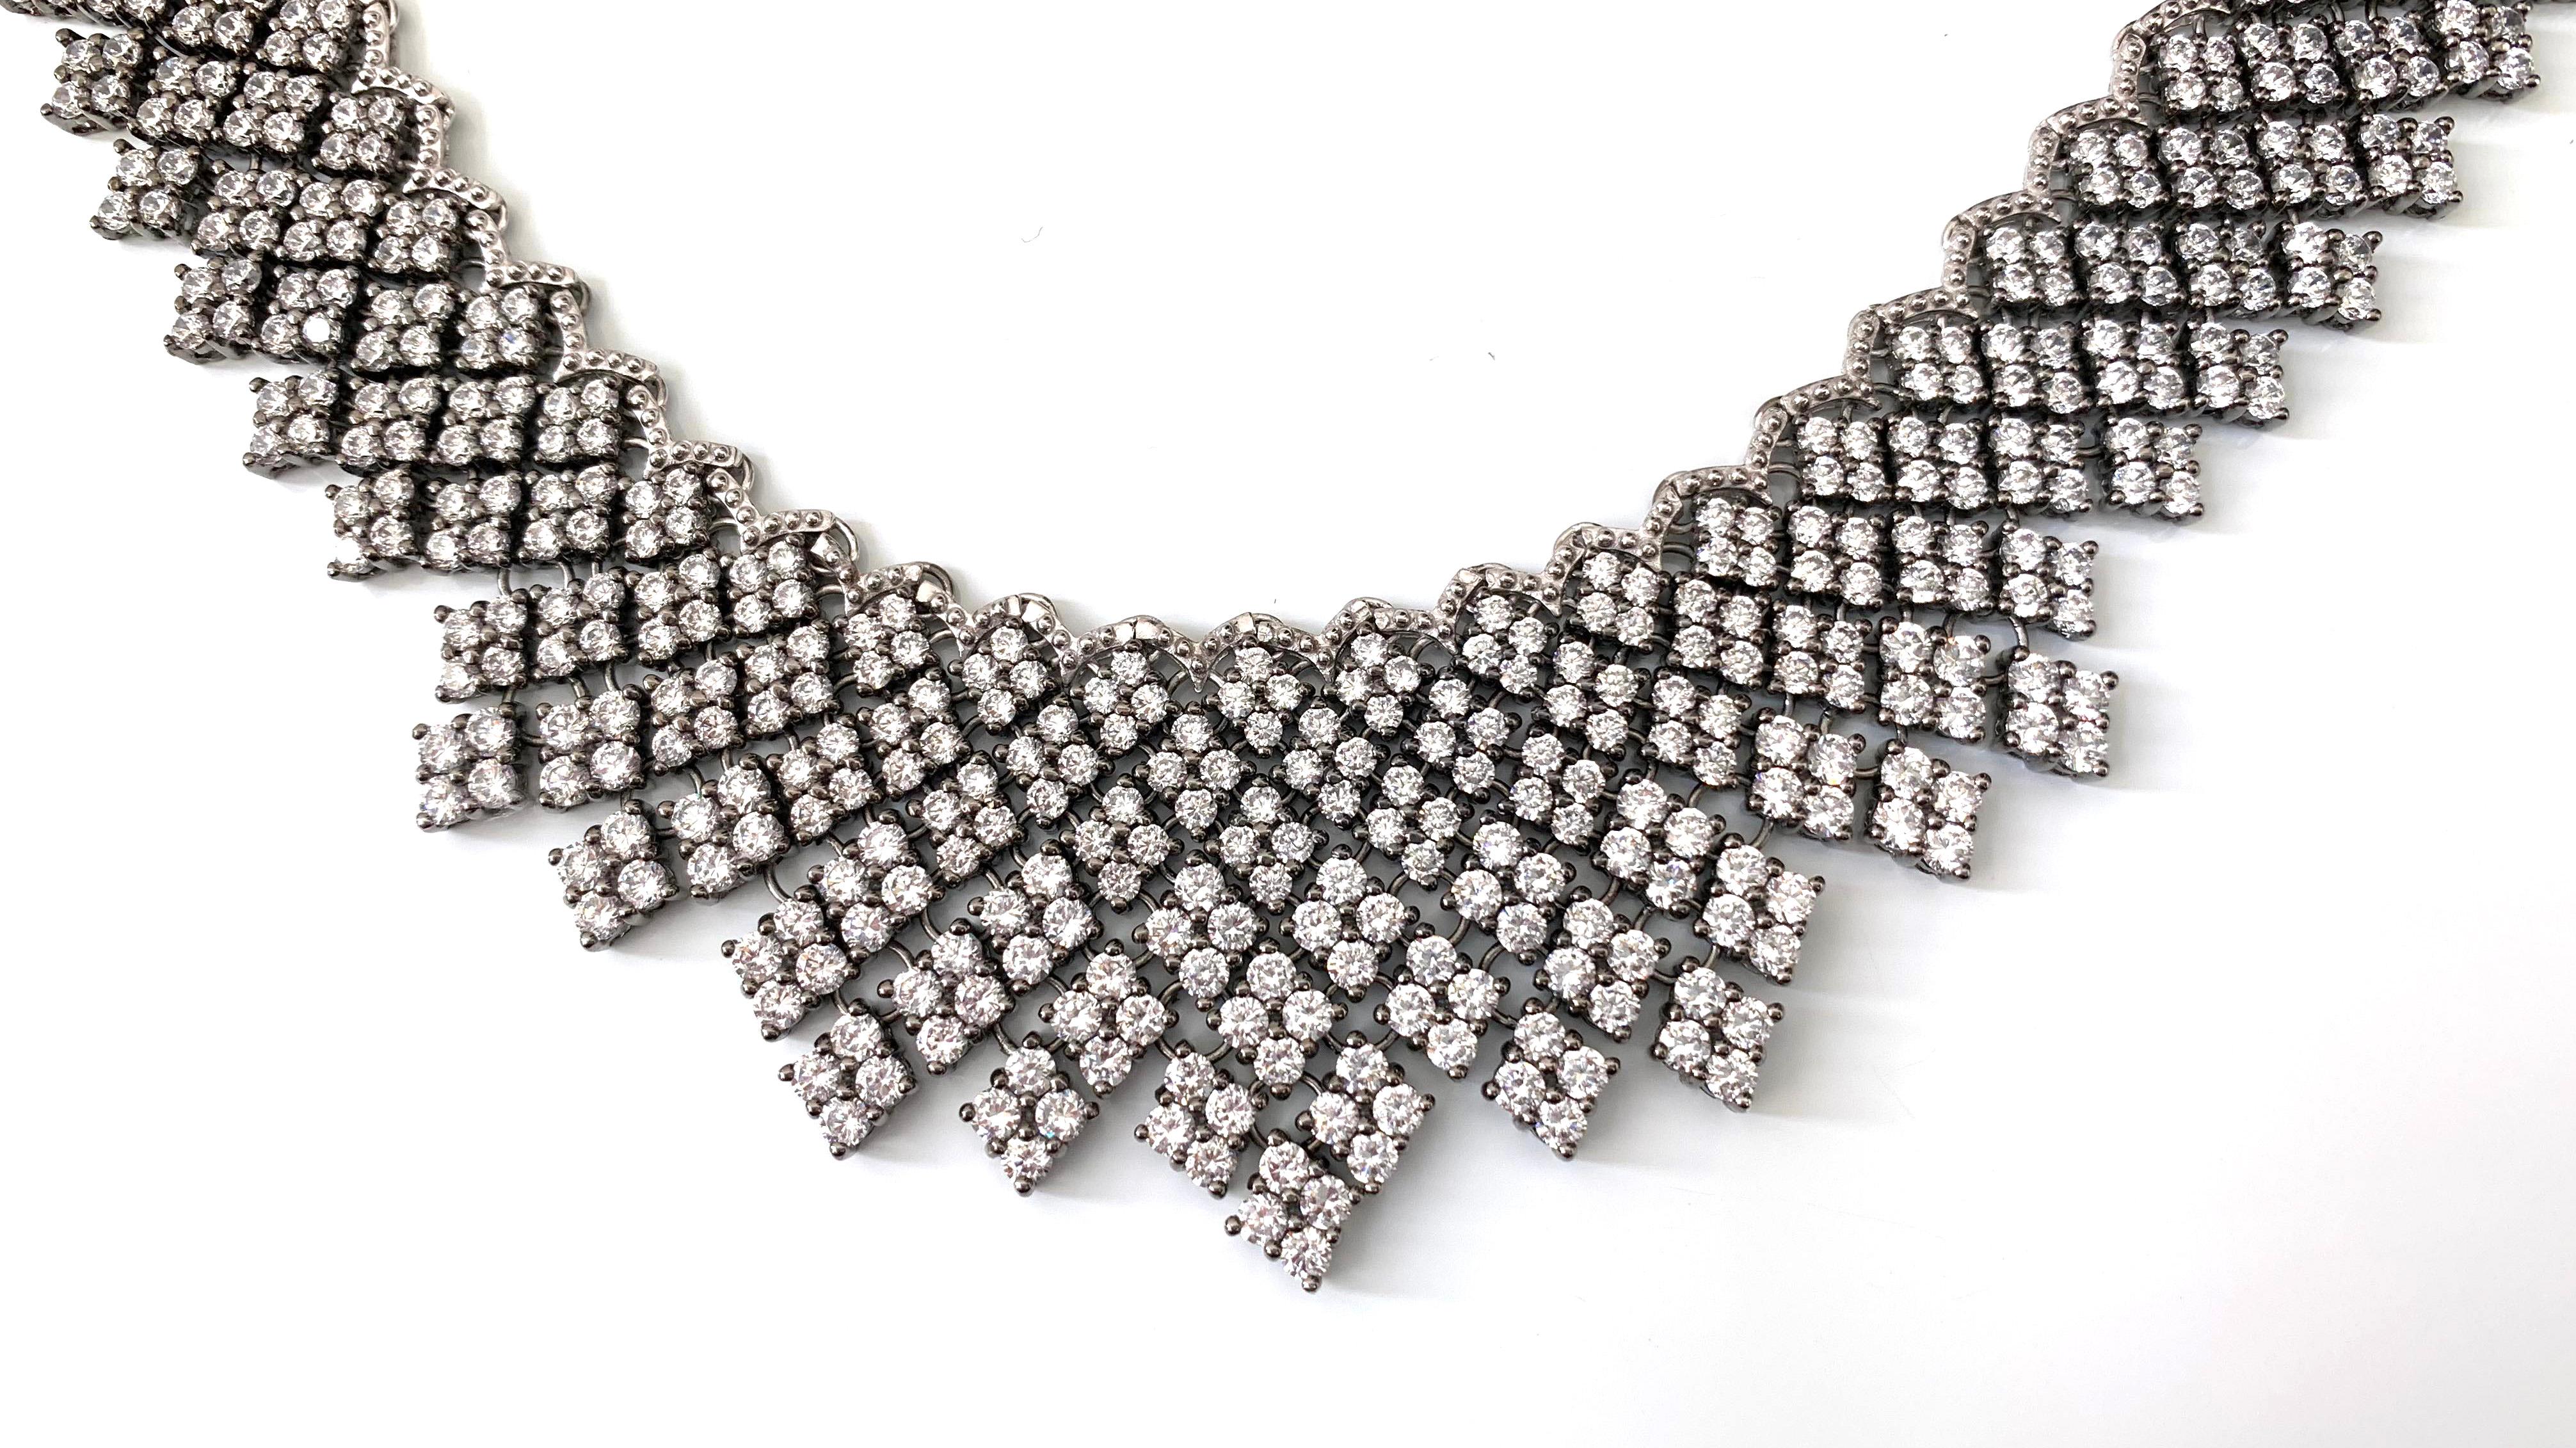 Elegant multi-link diamond shape cubic zirconia bib necklace. Over 800 pieces of round Cubic Zirconia individually handset in platinum black rhodium plated sterling silver. Push clasp closure with '8' safety lock. Each part is interconnected making